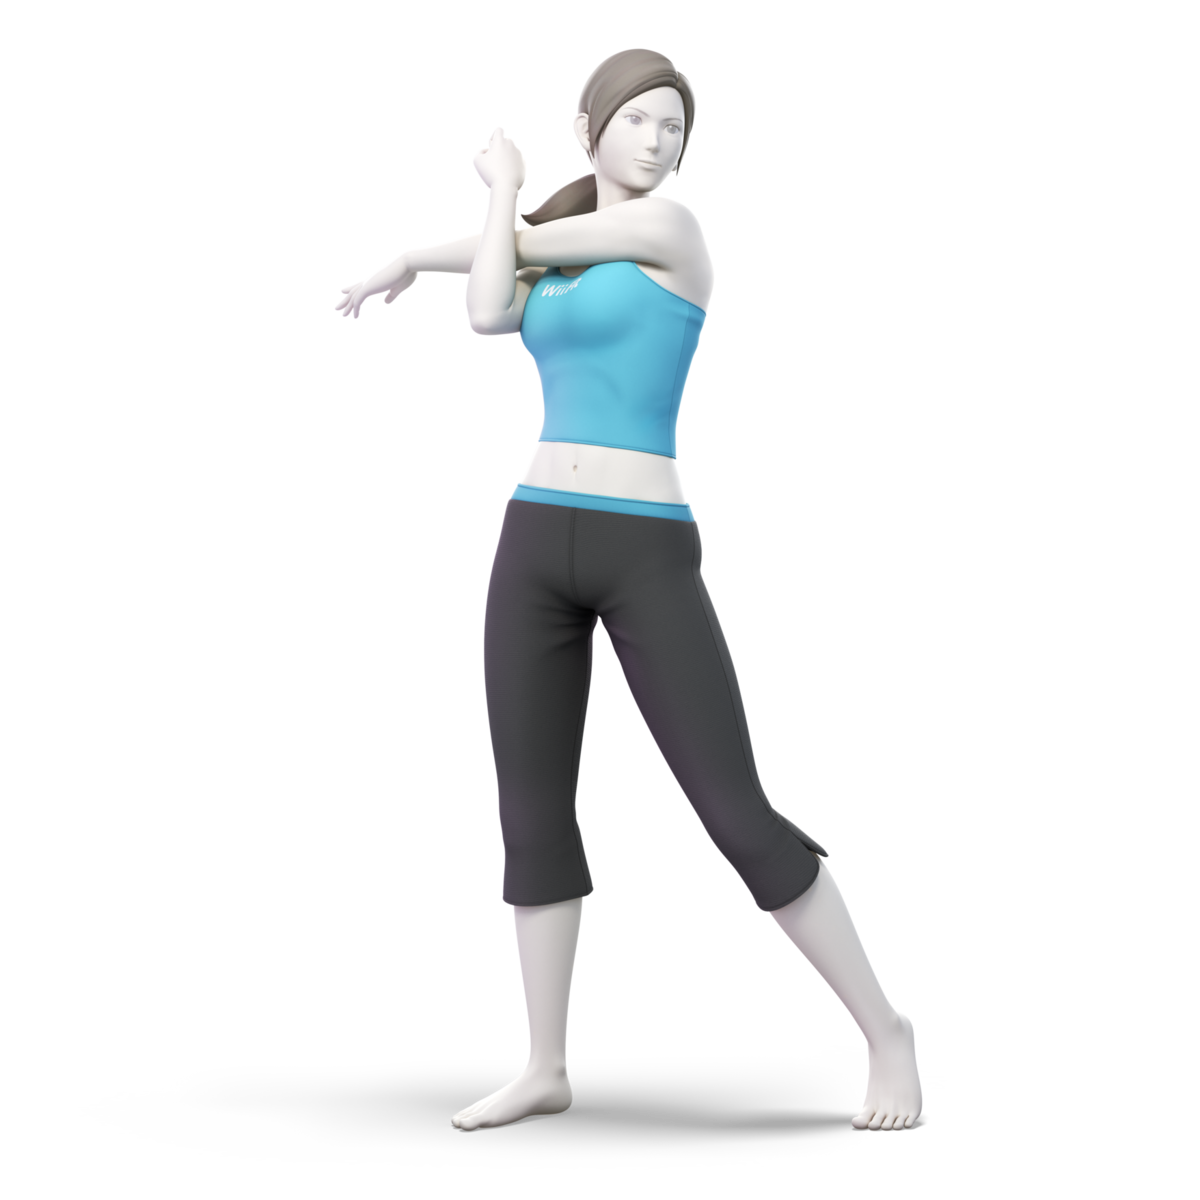 Smash Bros. Wii U screens show Wii Fit Trainer smacking 